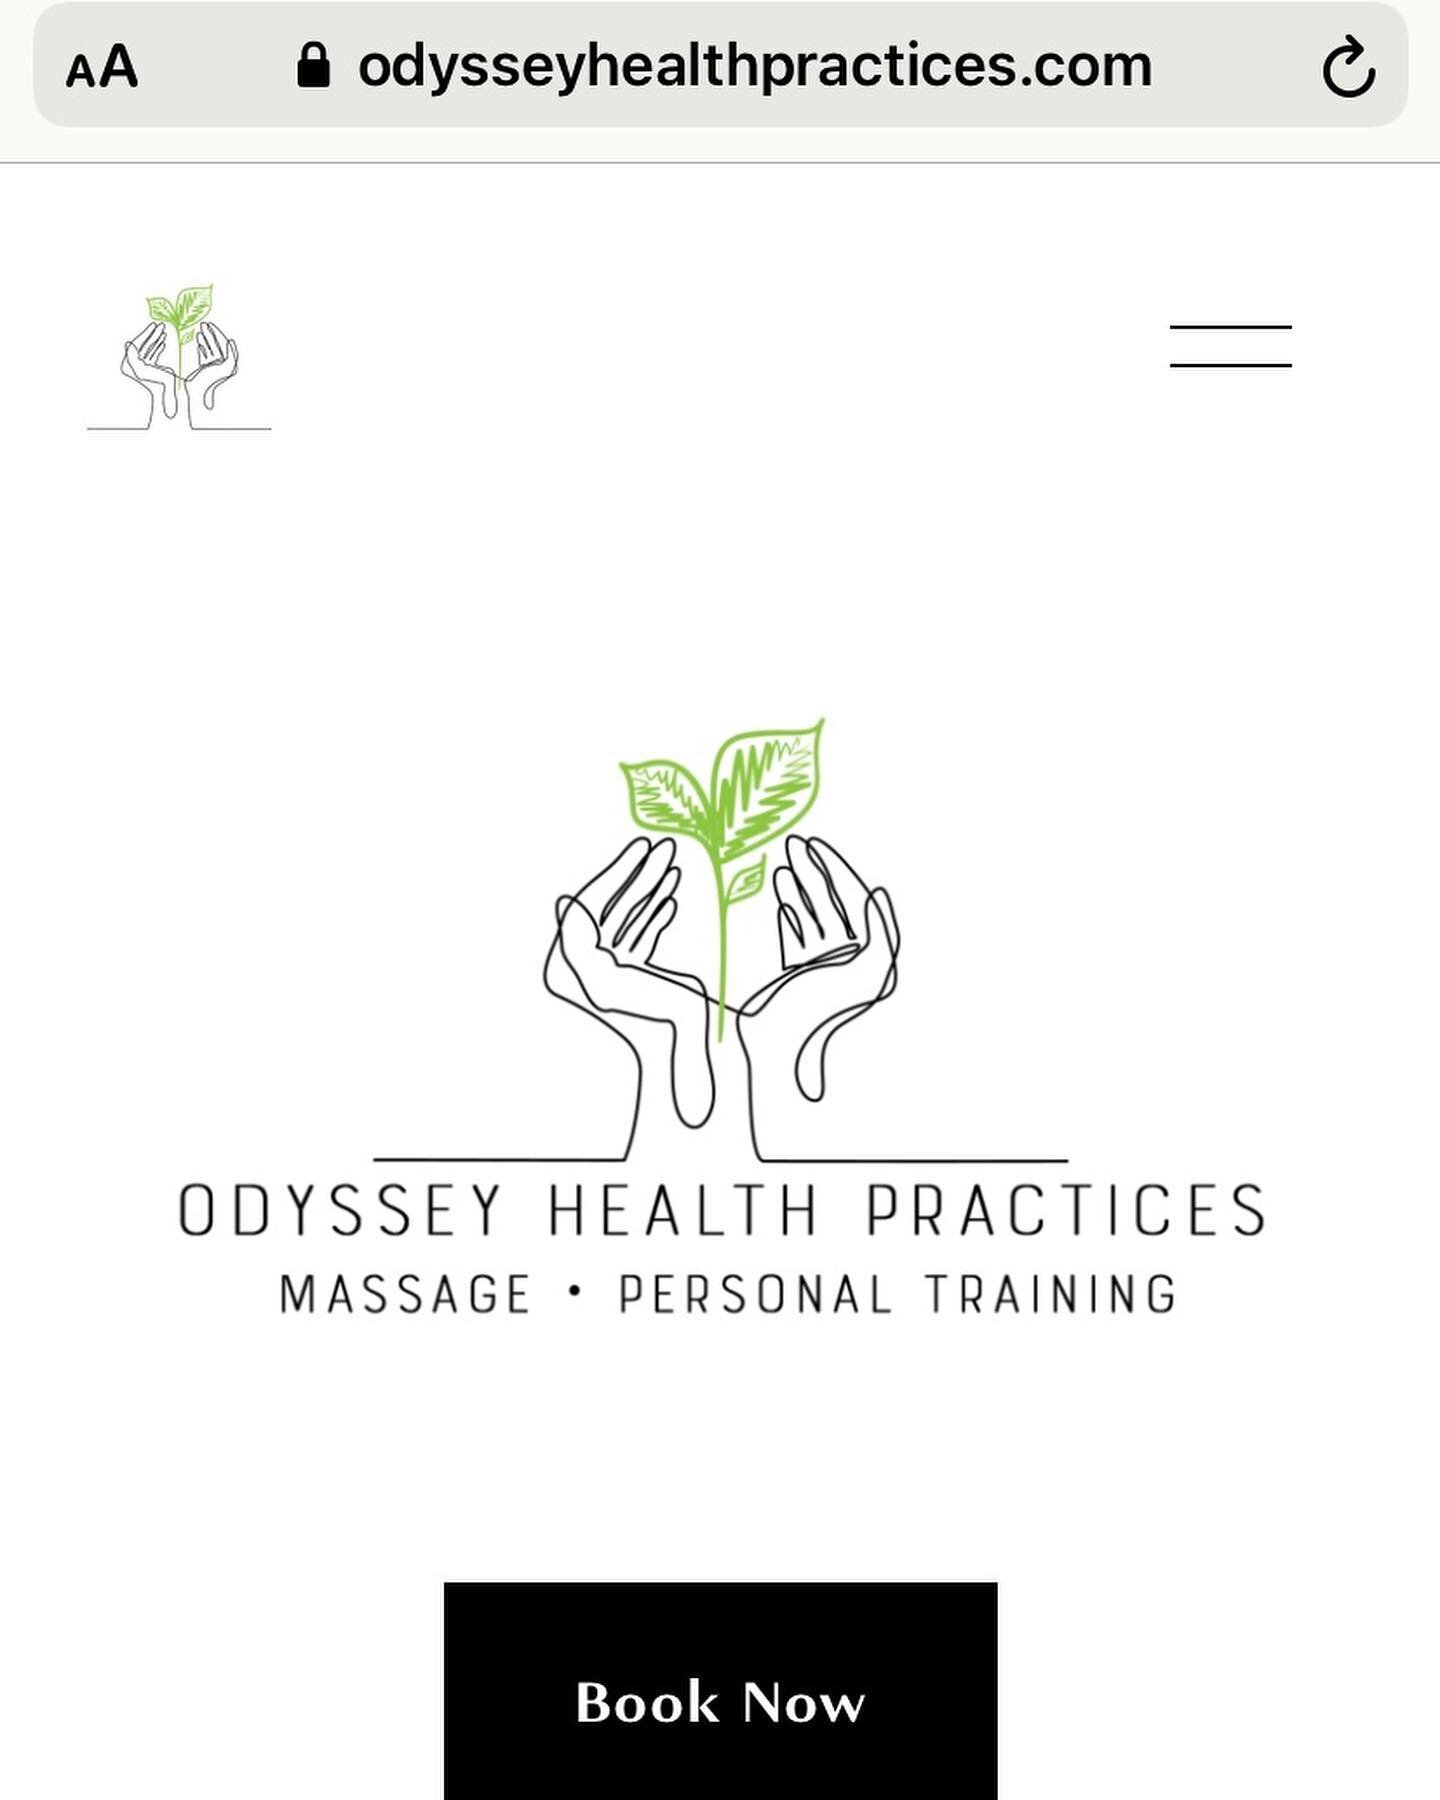 Website is LIVE!

1. Homepage screenshot

2. Home page - odysseyhealthpractices.com

3. Massage 

4. Calisthenics/ Personal Training

5. Contact

#website #peaq #massage #calisthenics #personaltraining